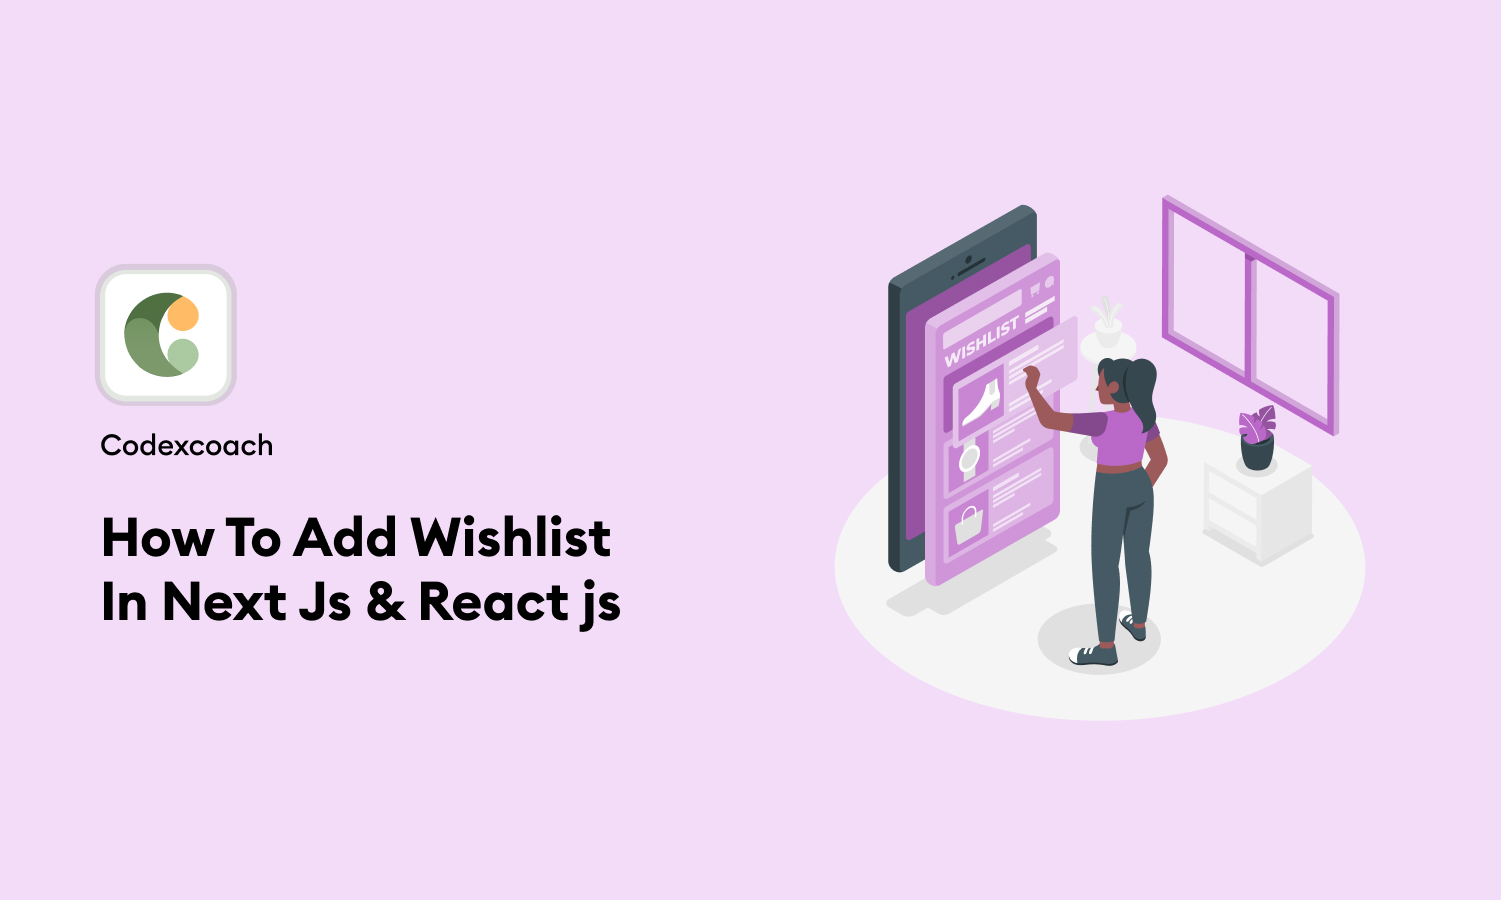 How To Add Wishlist In Next Js React js